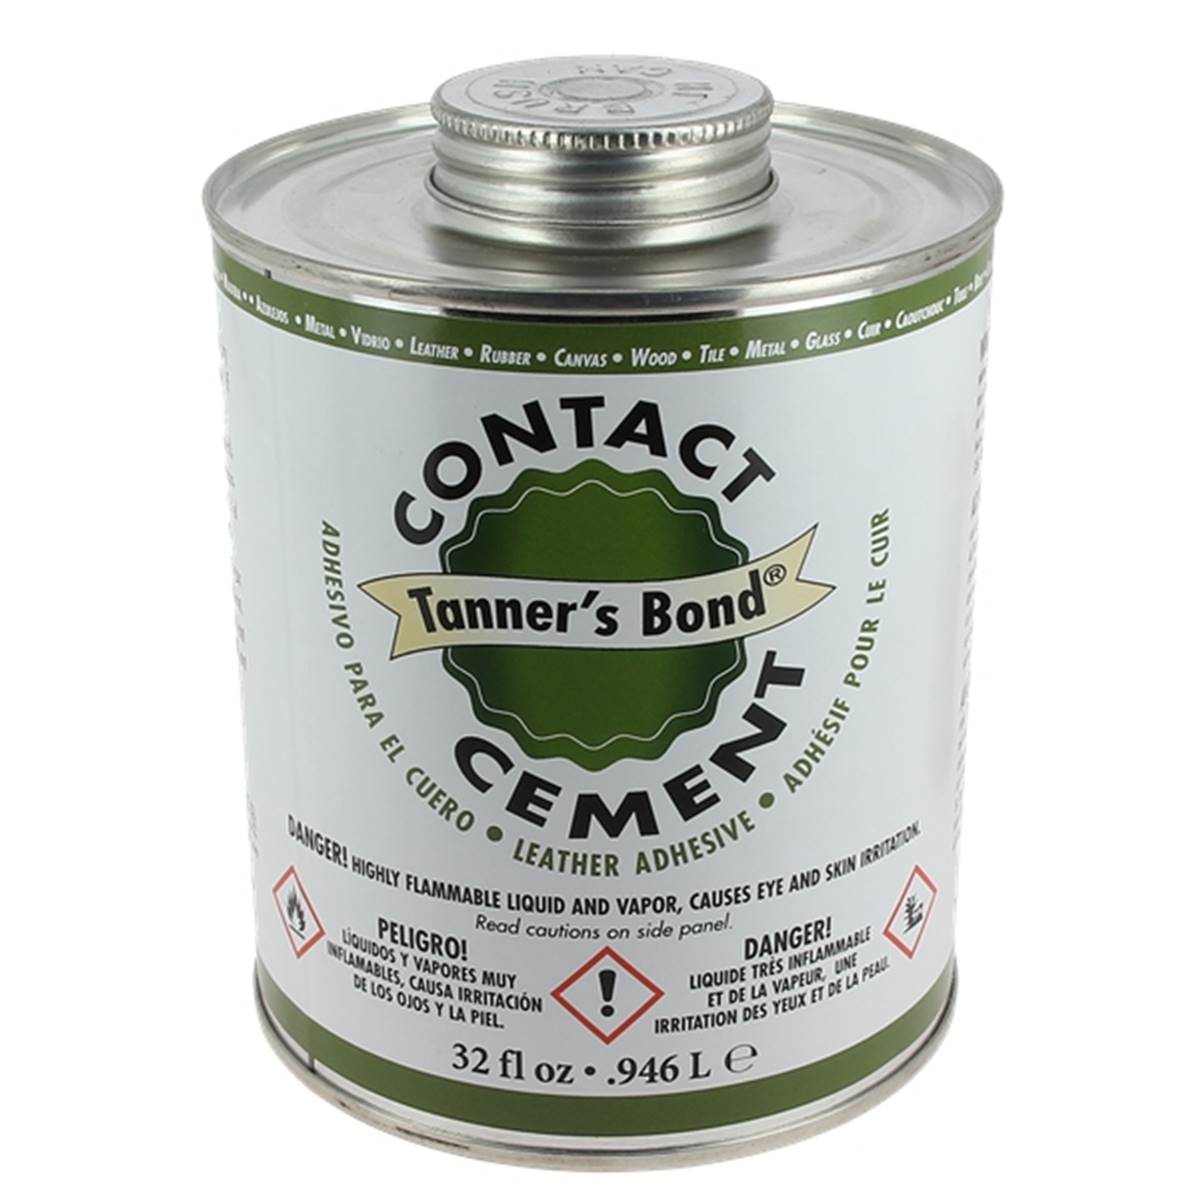 Colle contact pour cuir - Tanner's Bond